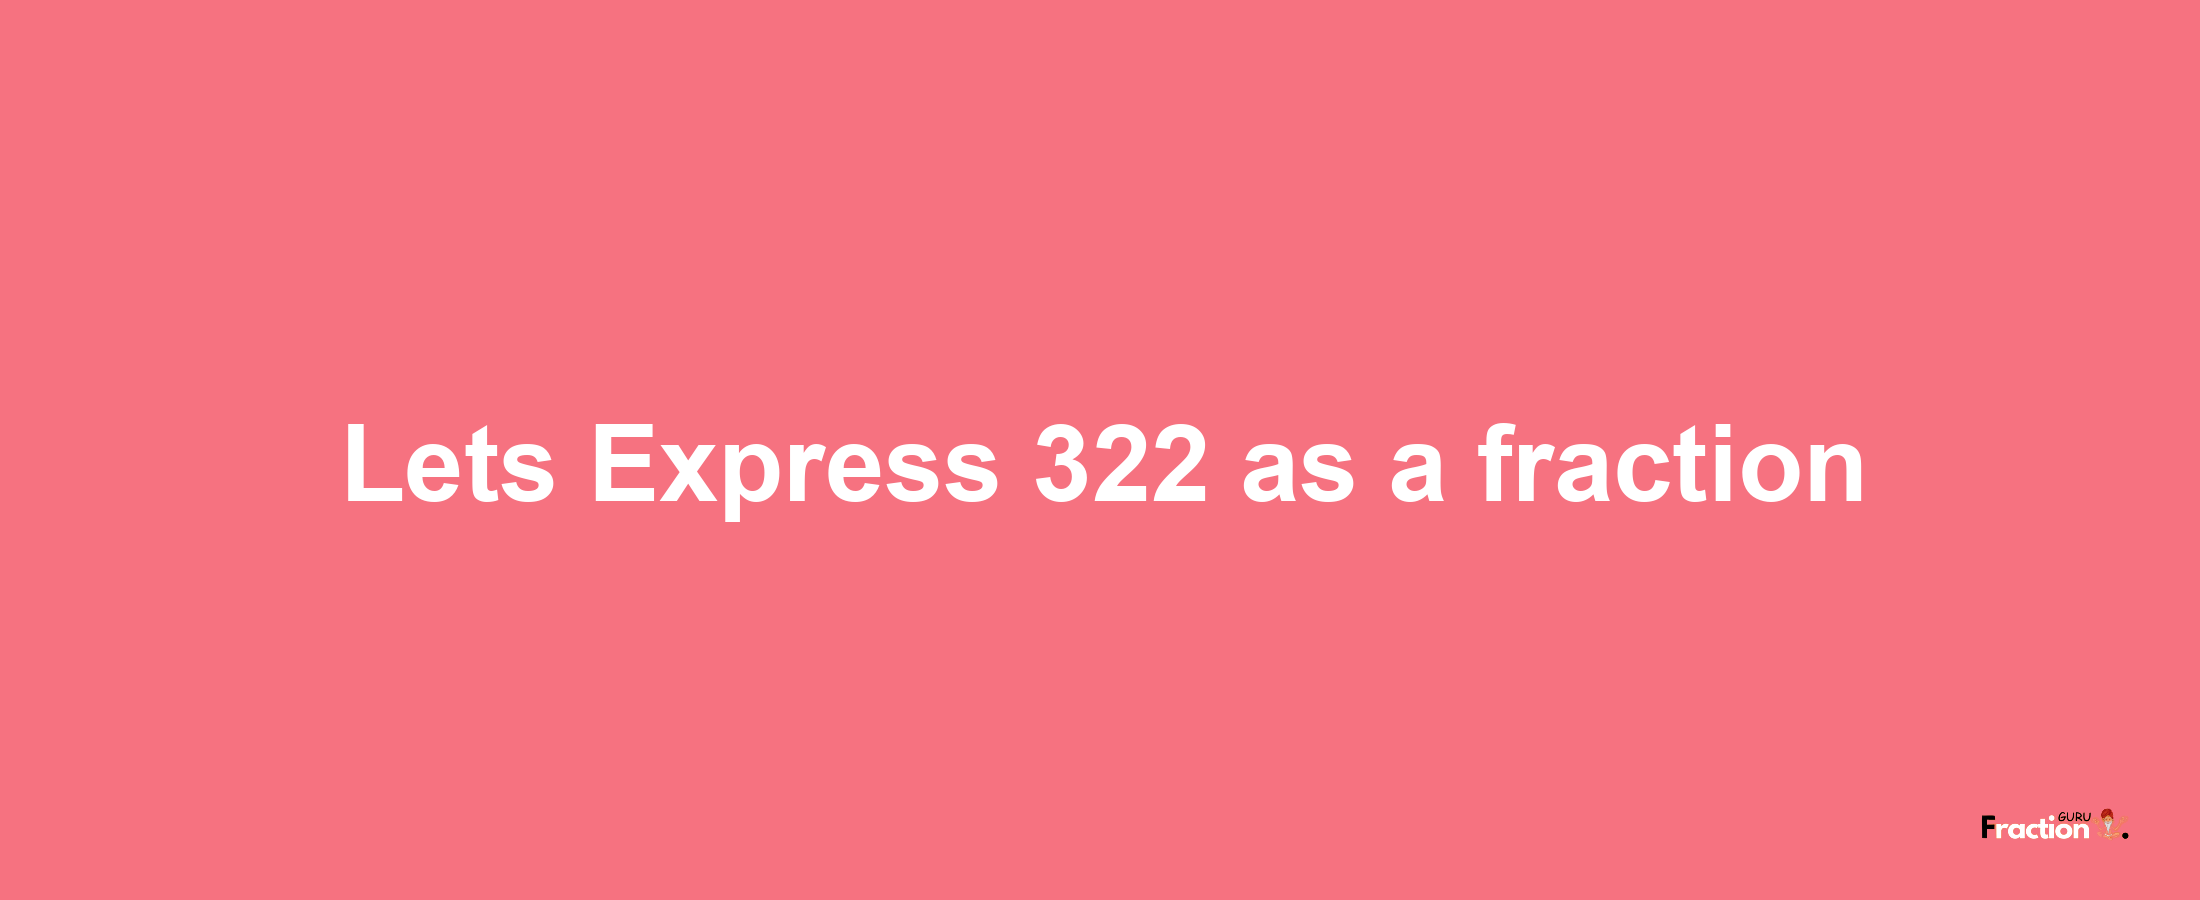 Lets Express 322 as afraction